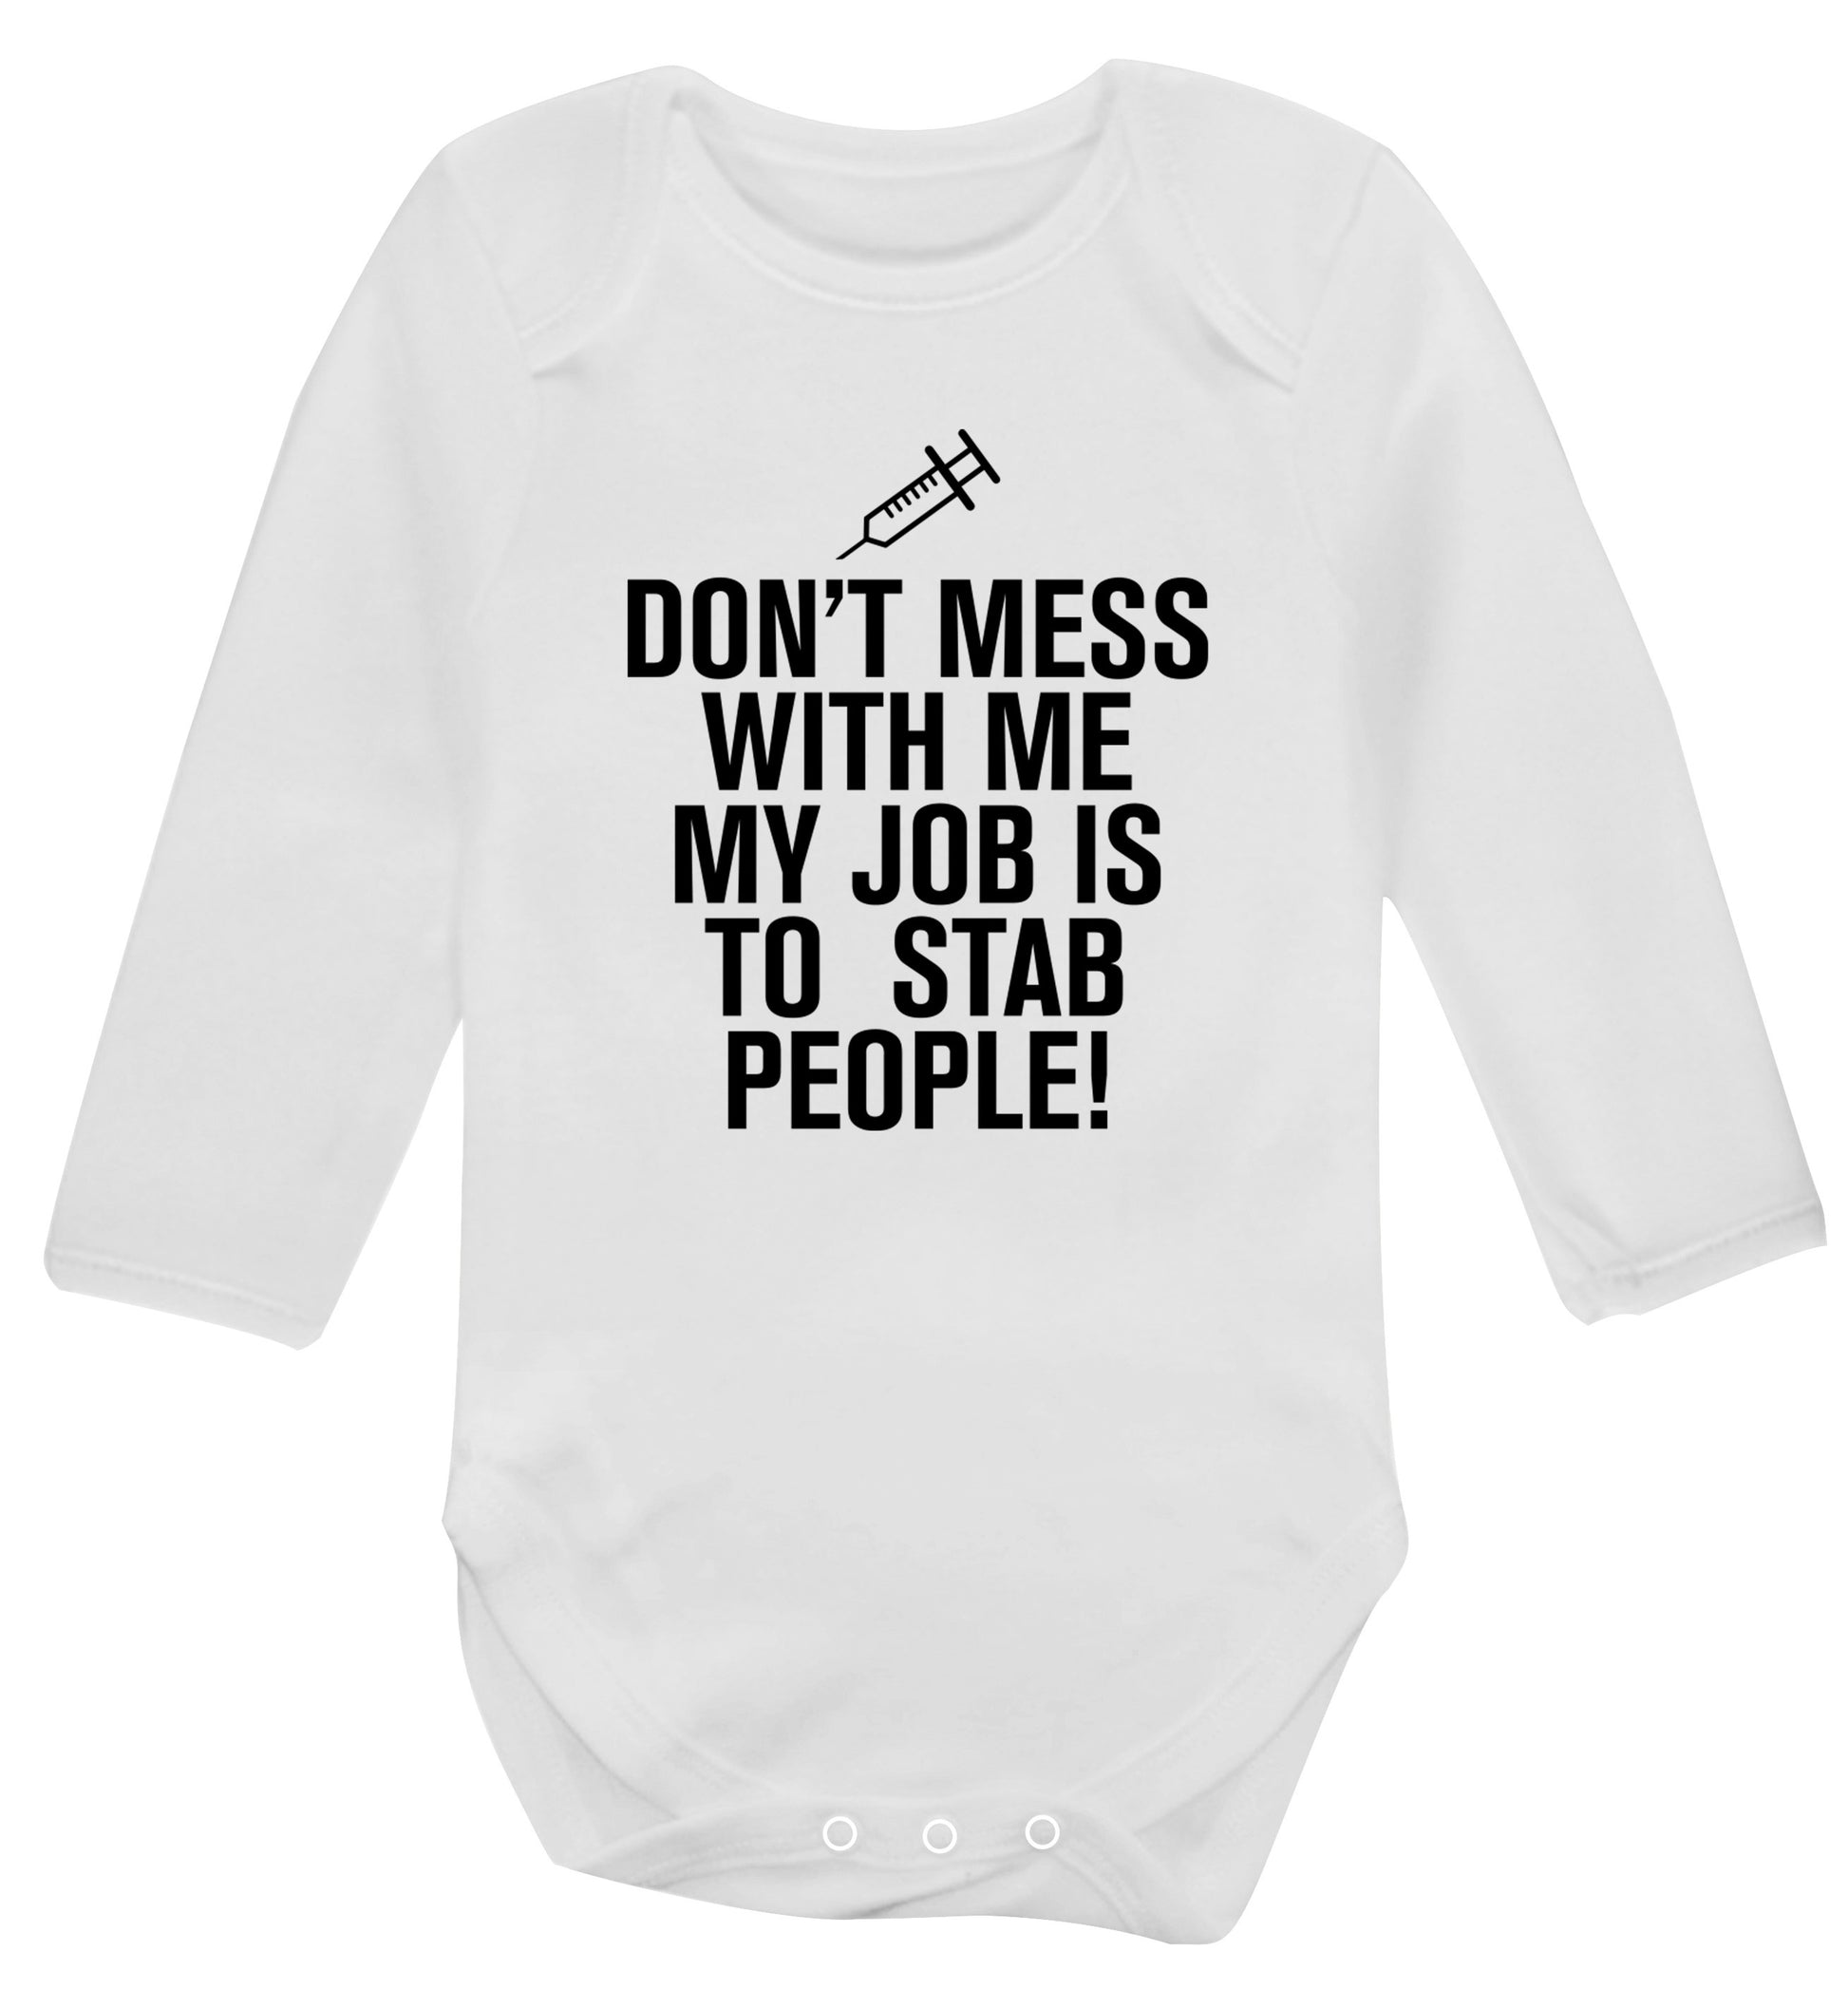 Don't mess with me my job is to stab people! Baby Vest long sleeved white 6-12 months